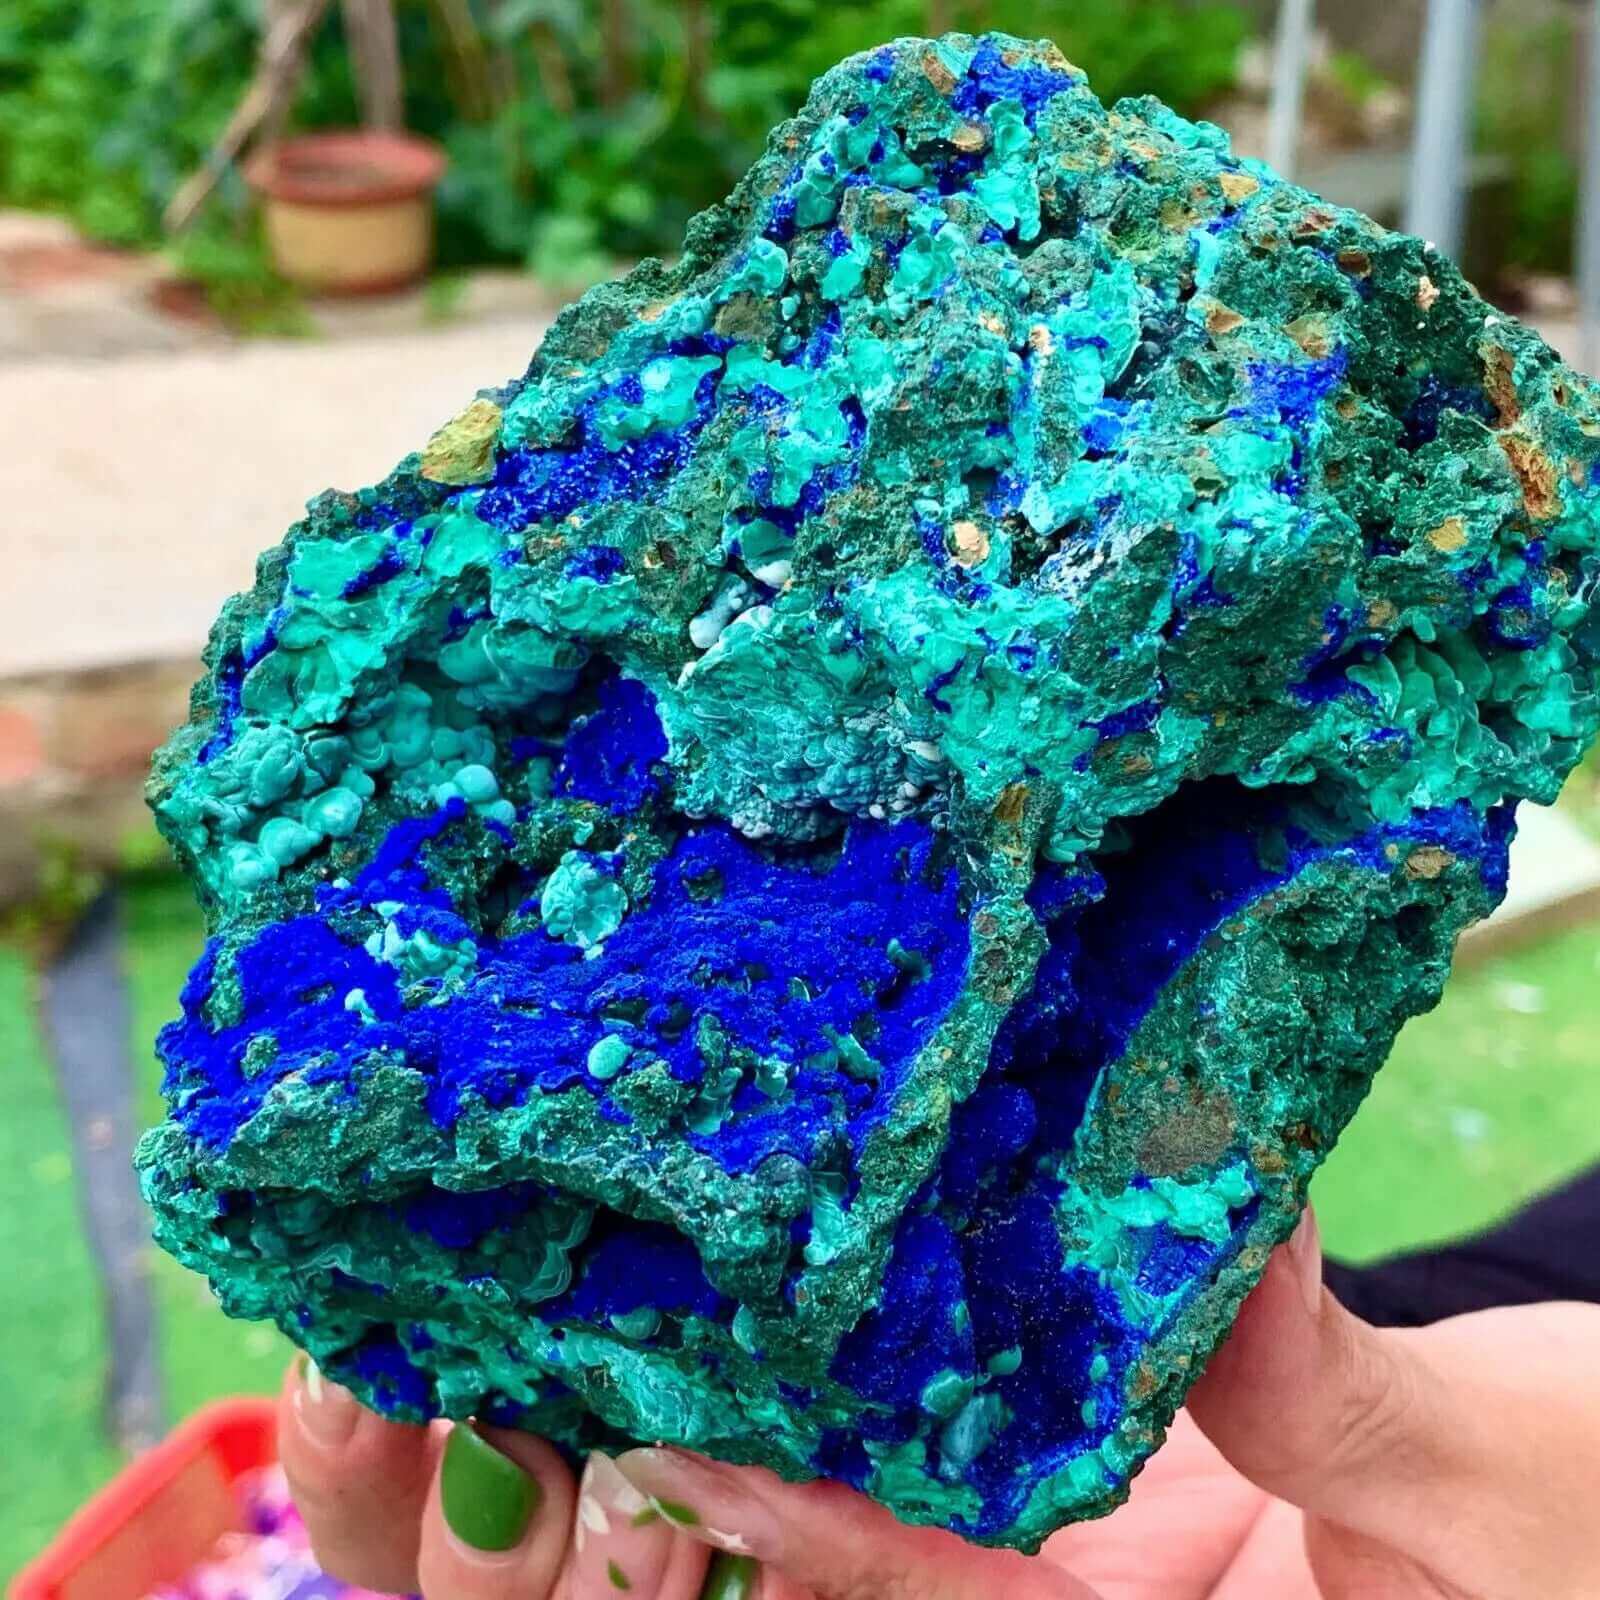 You will find Natural Azurite Malachite, £90.0 on www.nauradika.com in our collection: Loose Stones